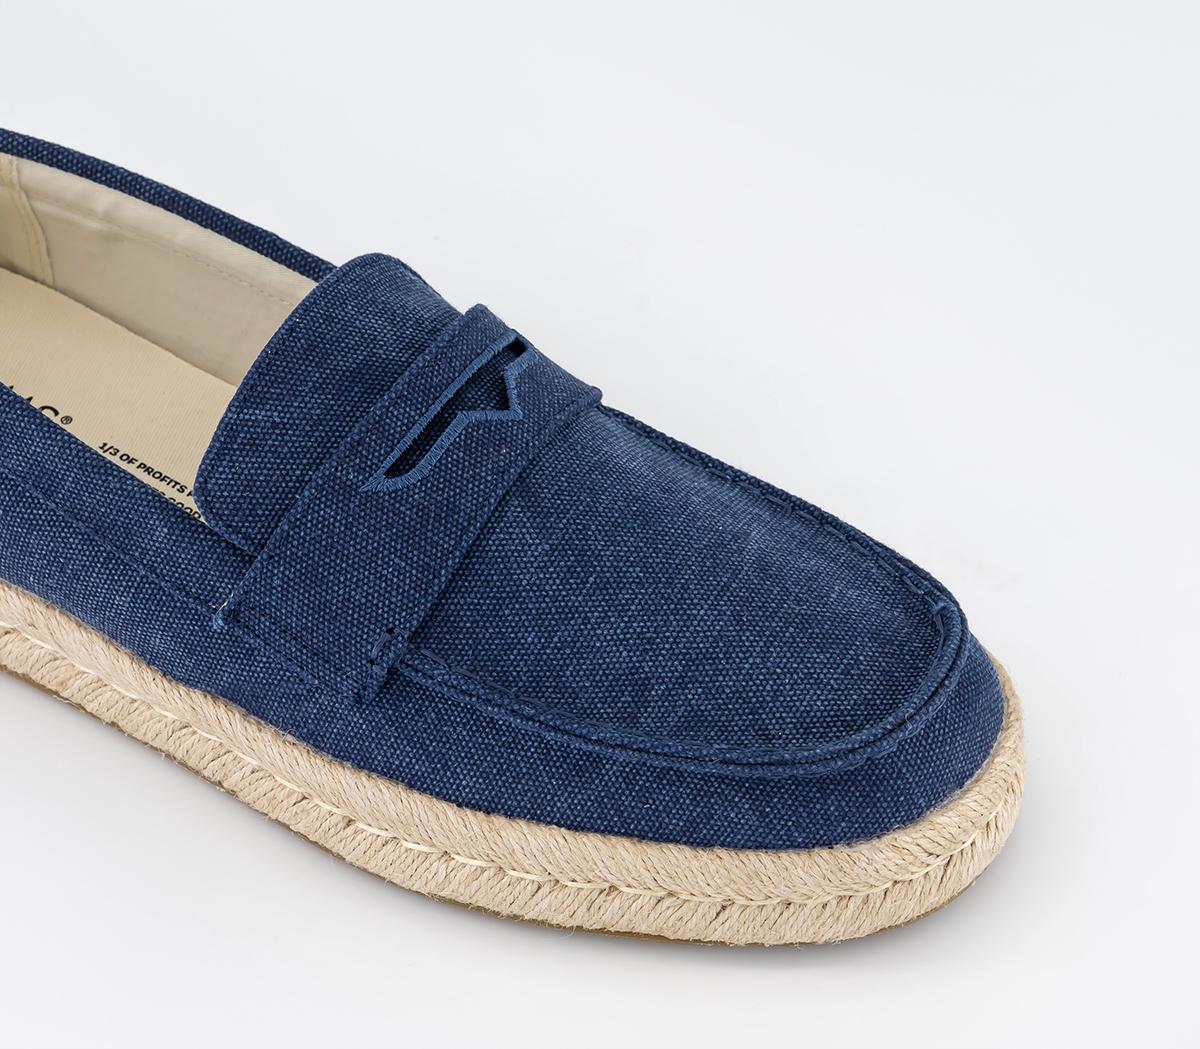 TOMS Stanford Rope Shoes Navy Canvas - Men's Casual Shoes